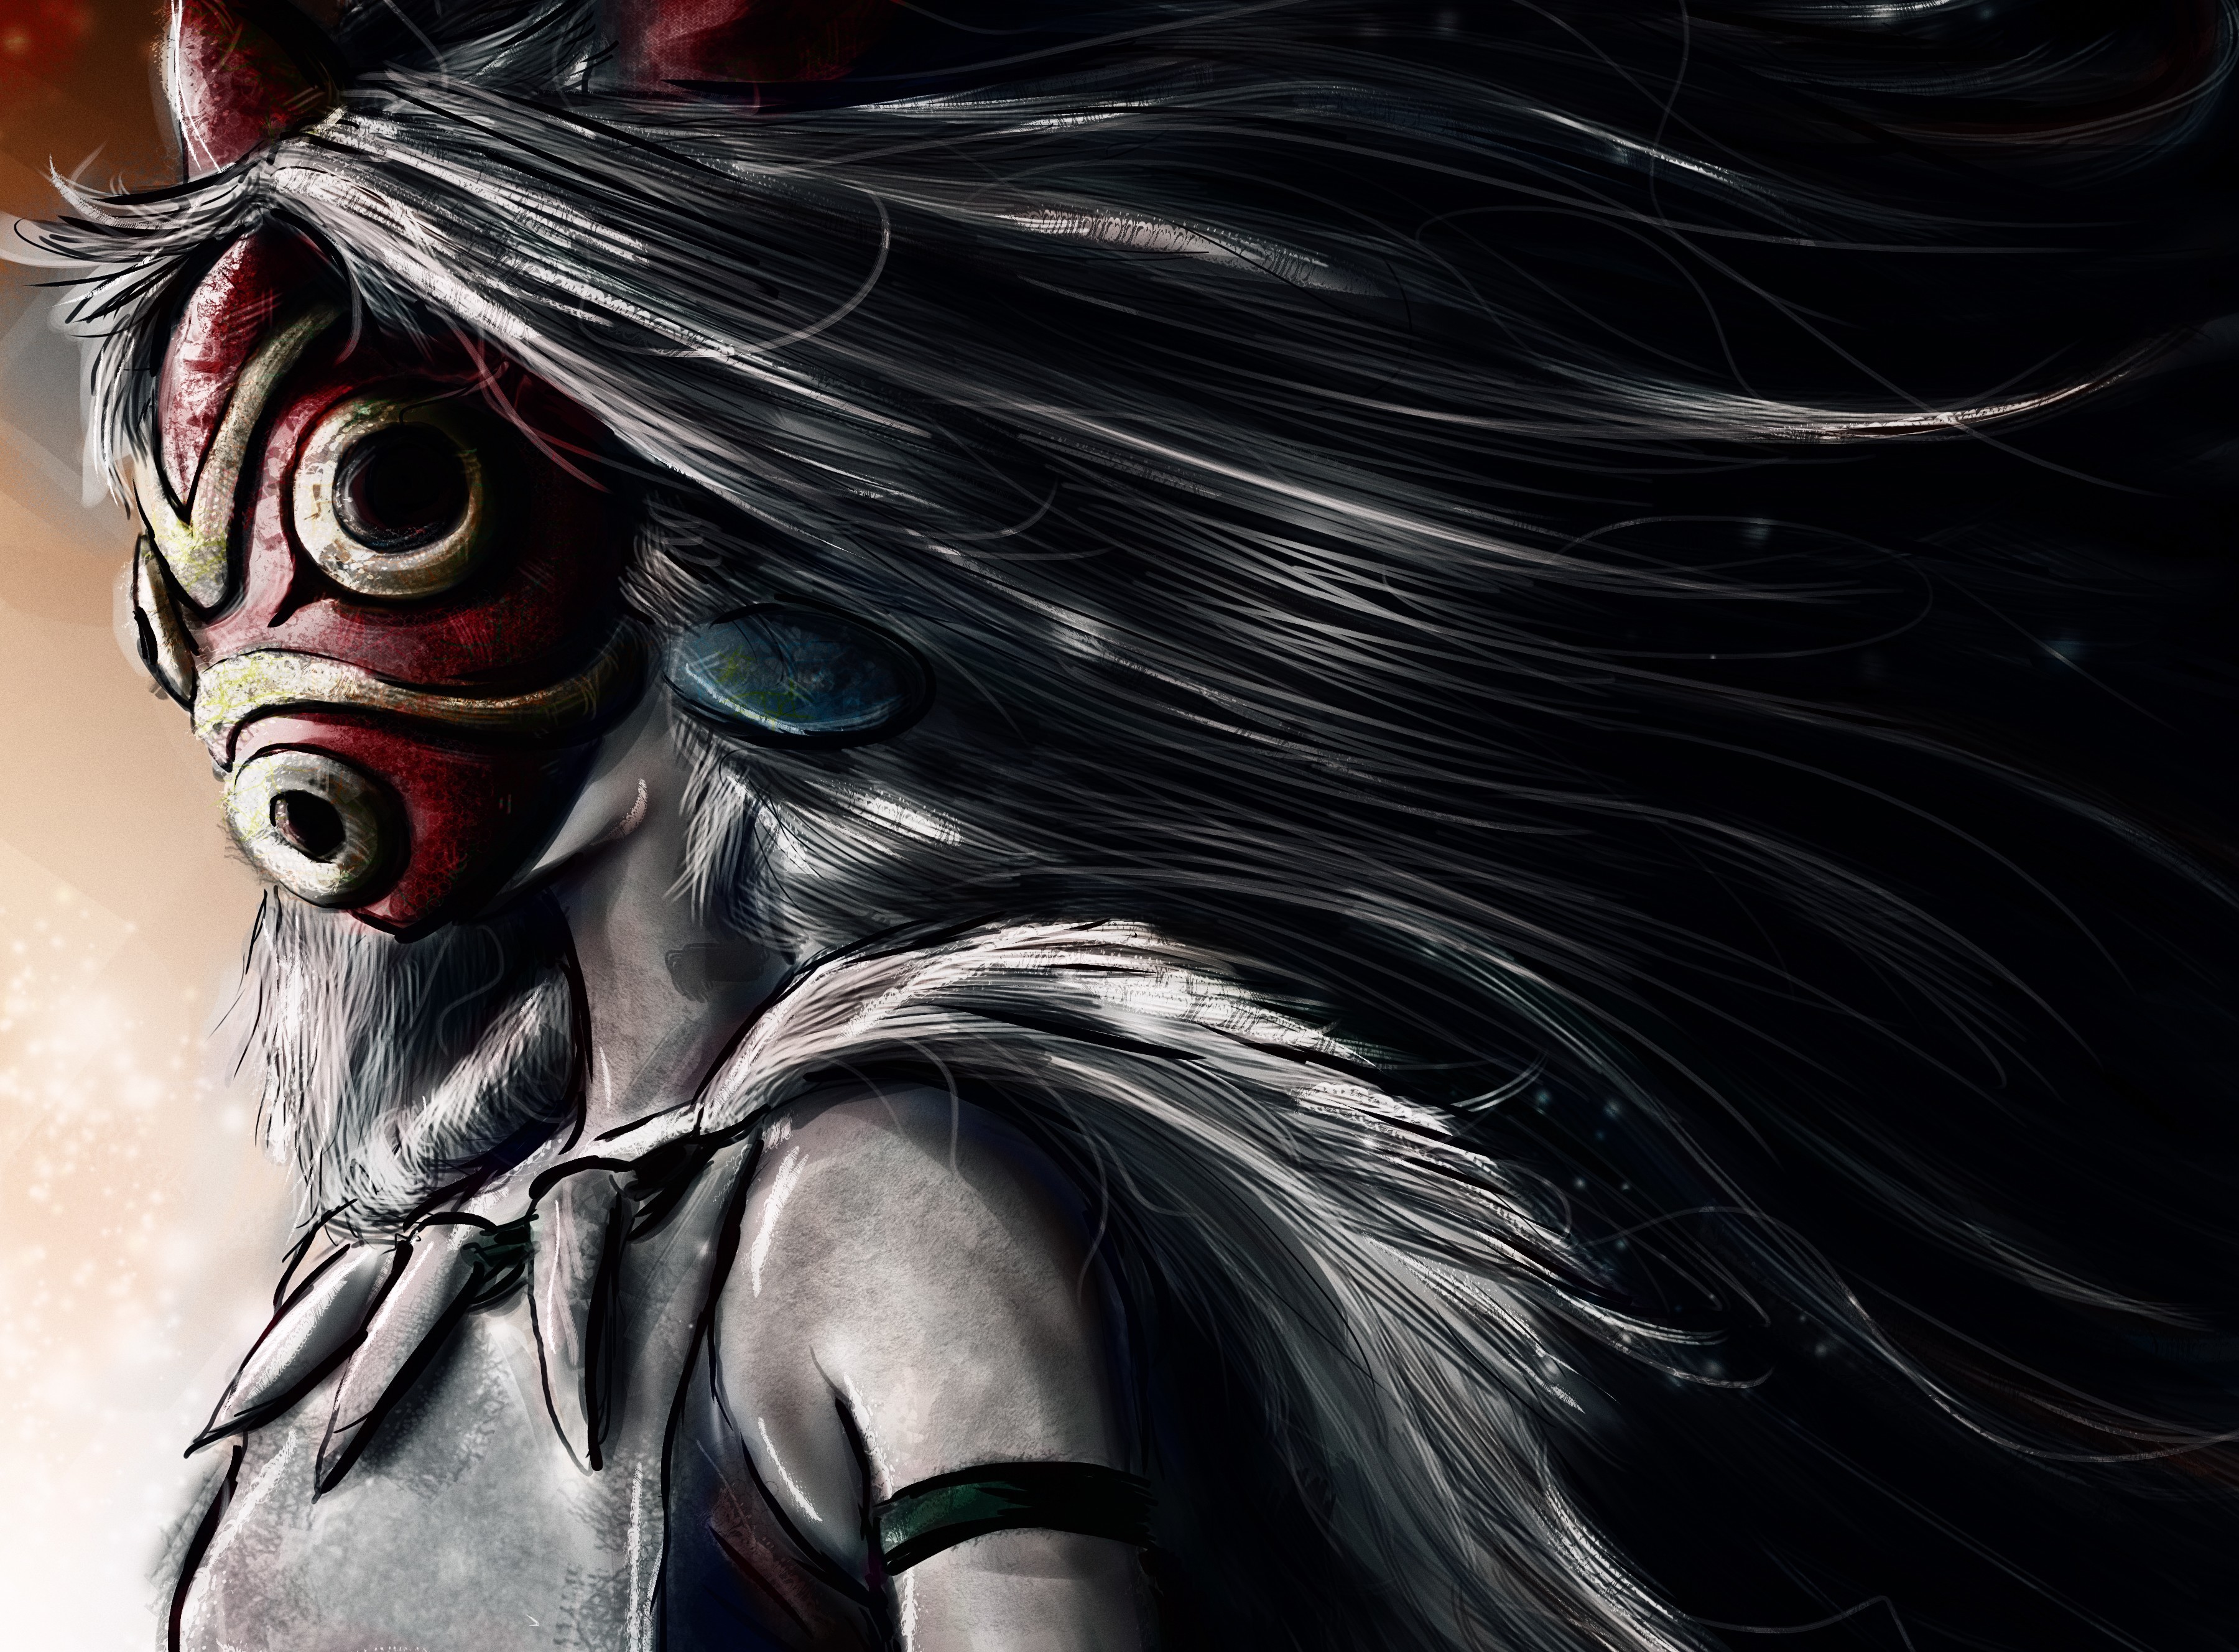 14 Princess Mononoke Wallpapers for iPhone and Android by Brian Thornton